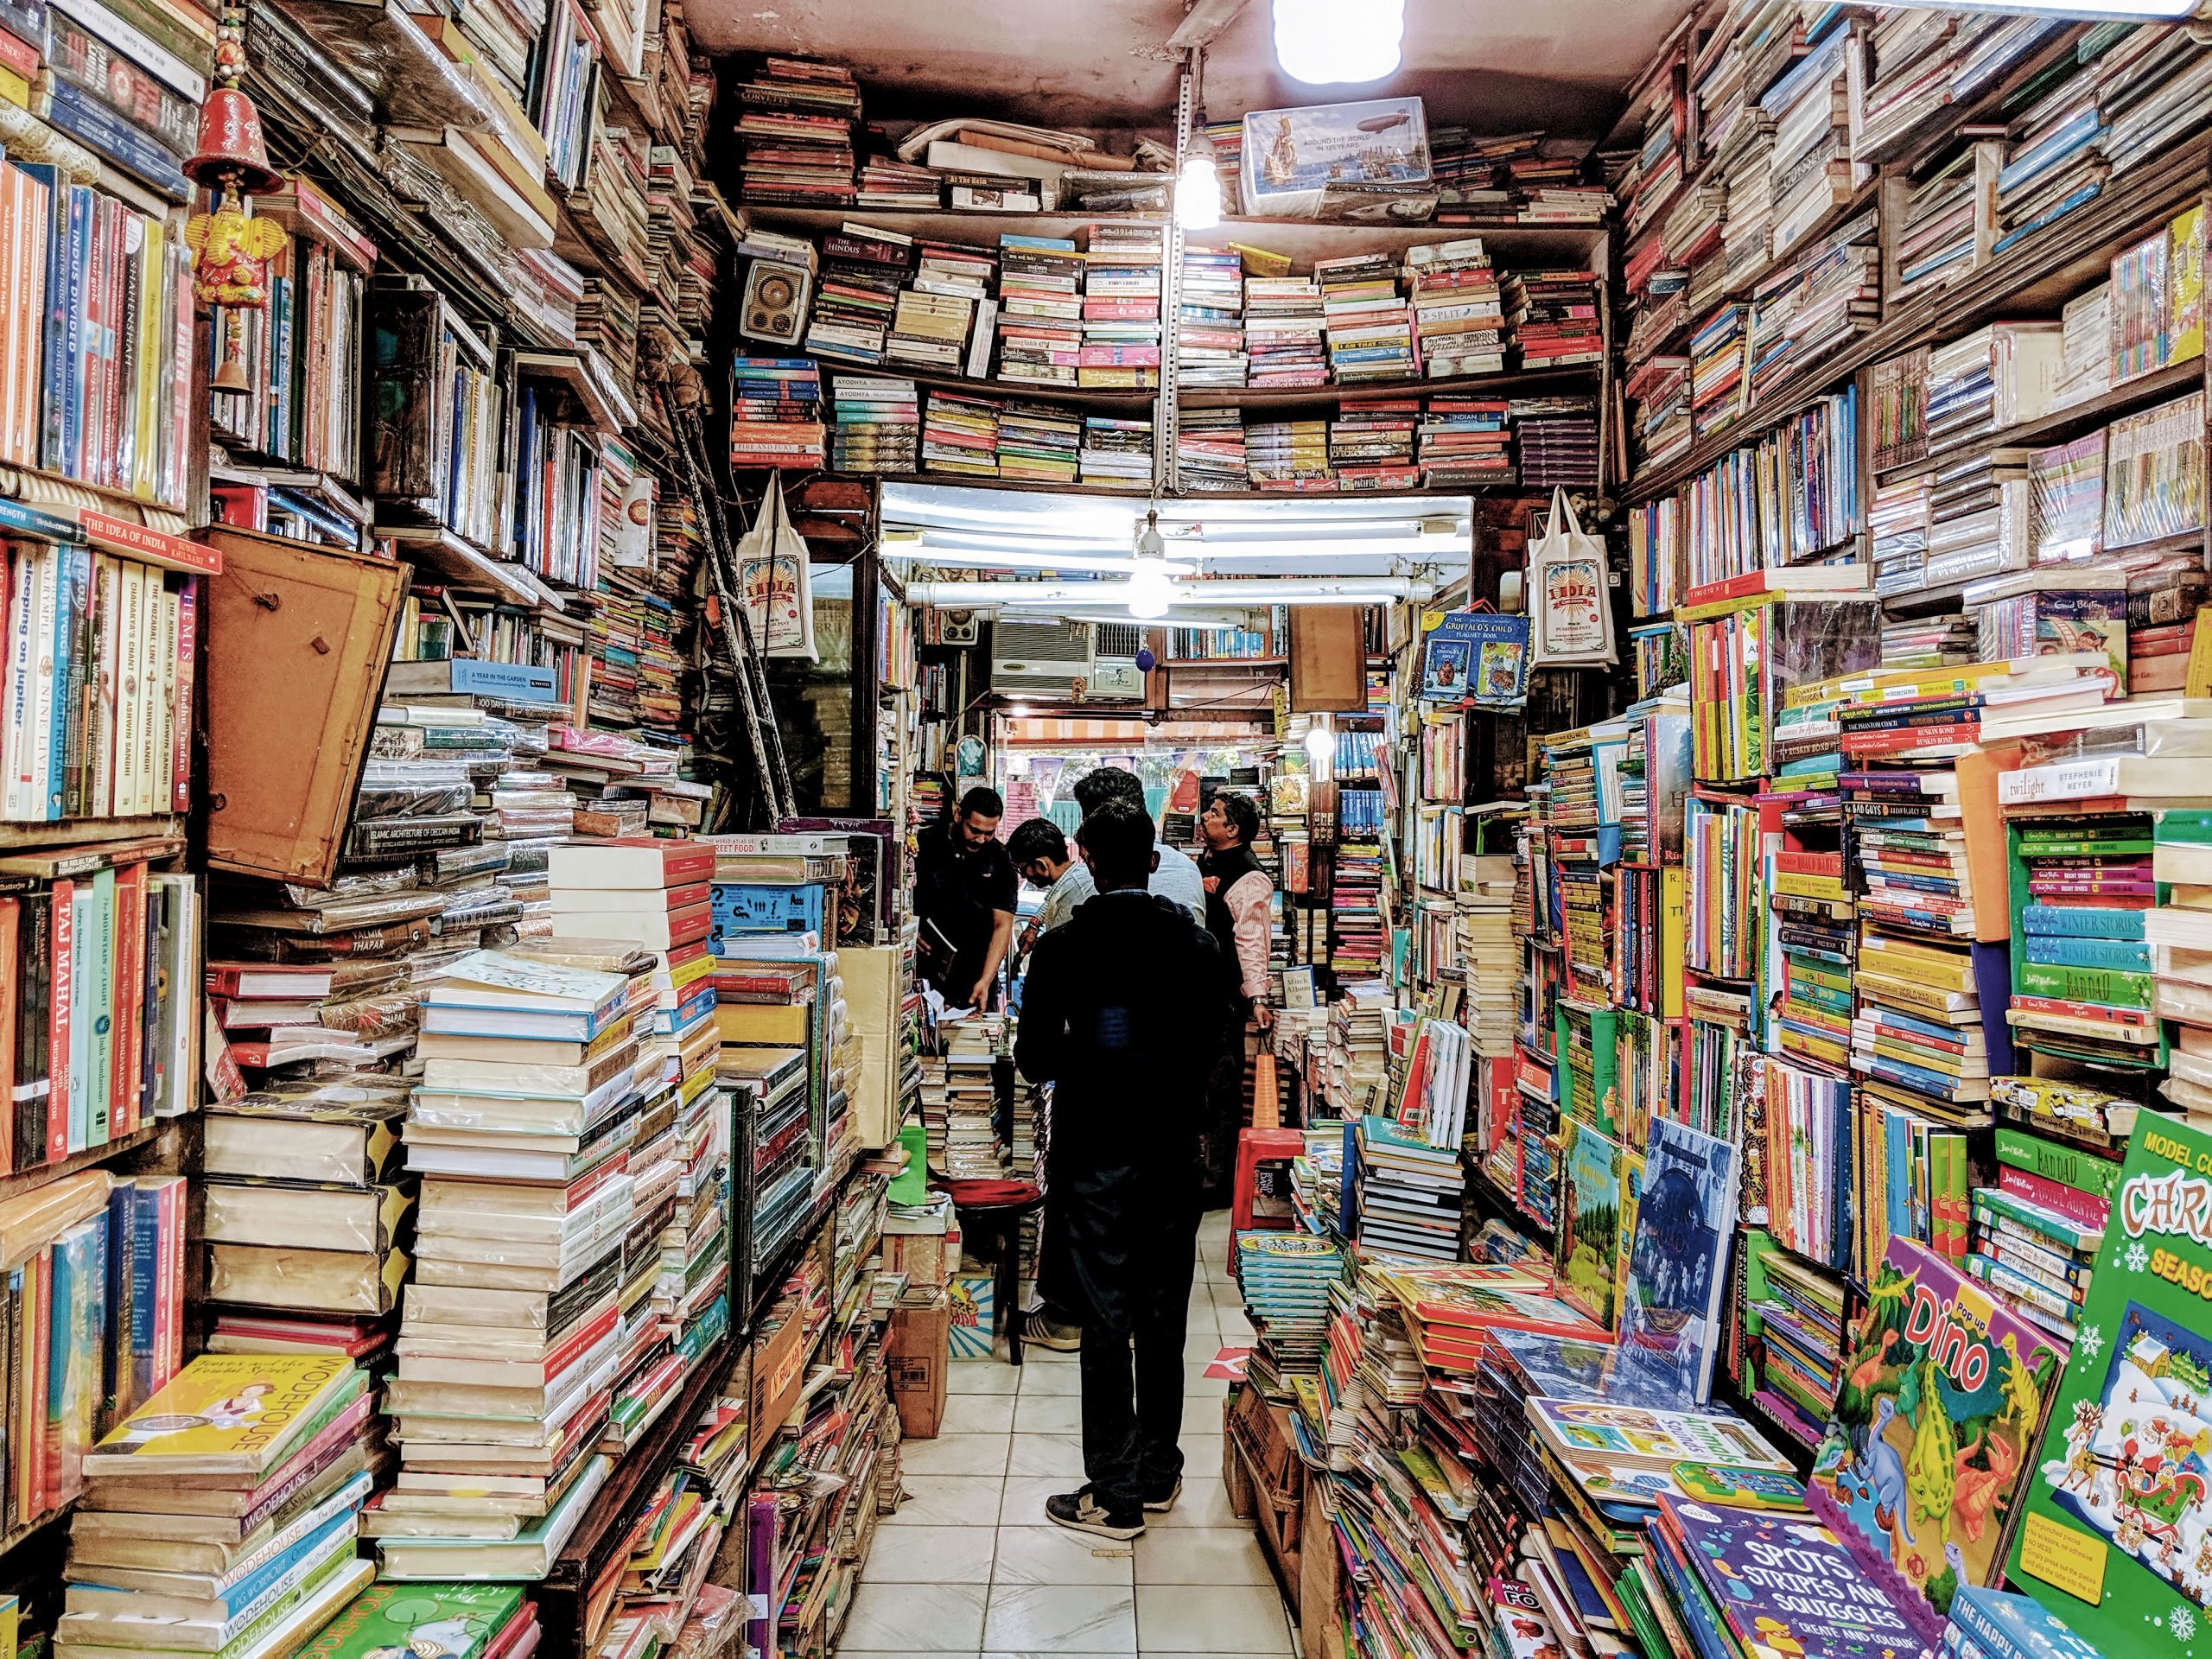 A shop filled floor-to-ceiling with books